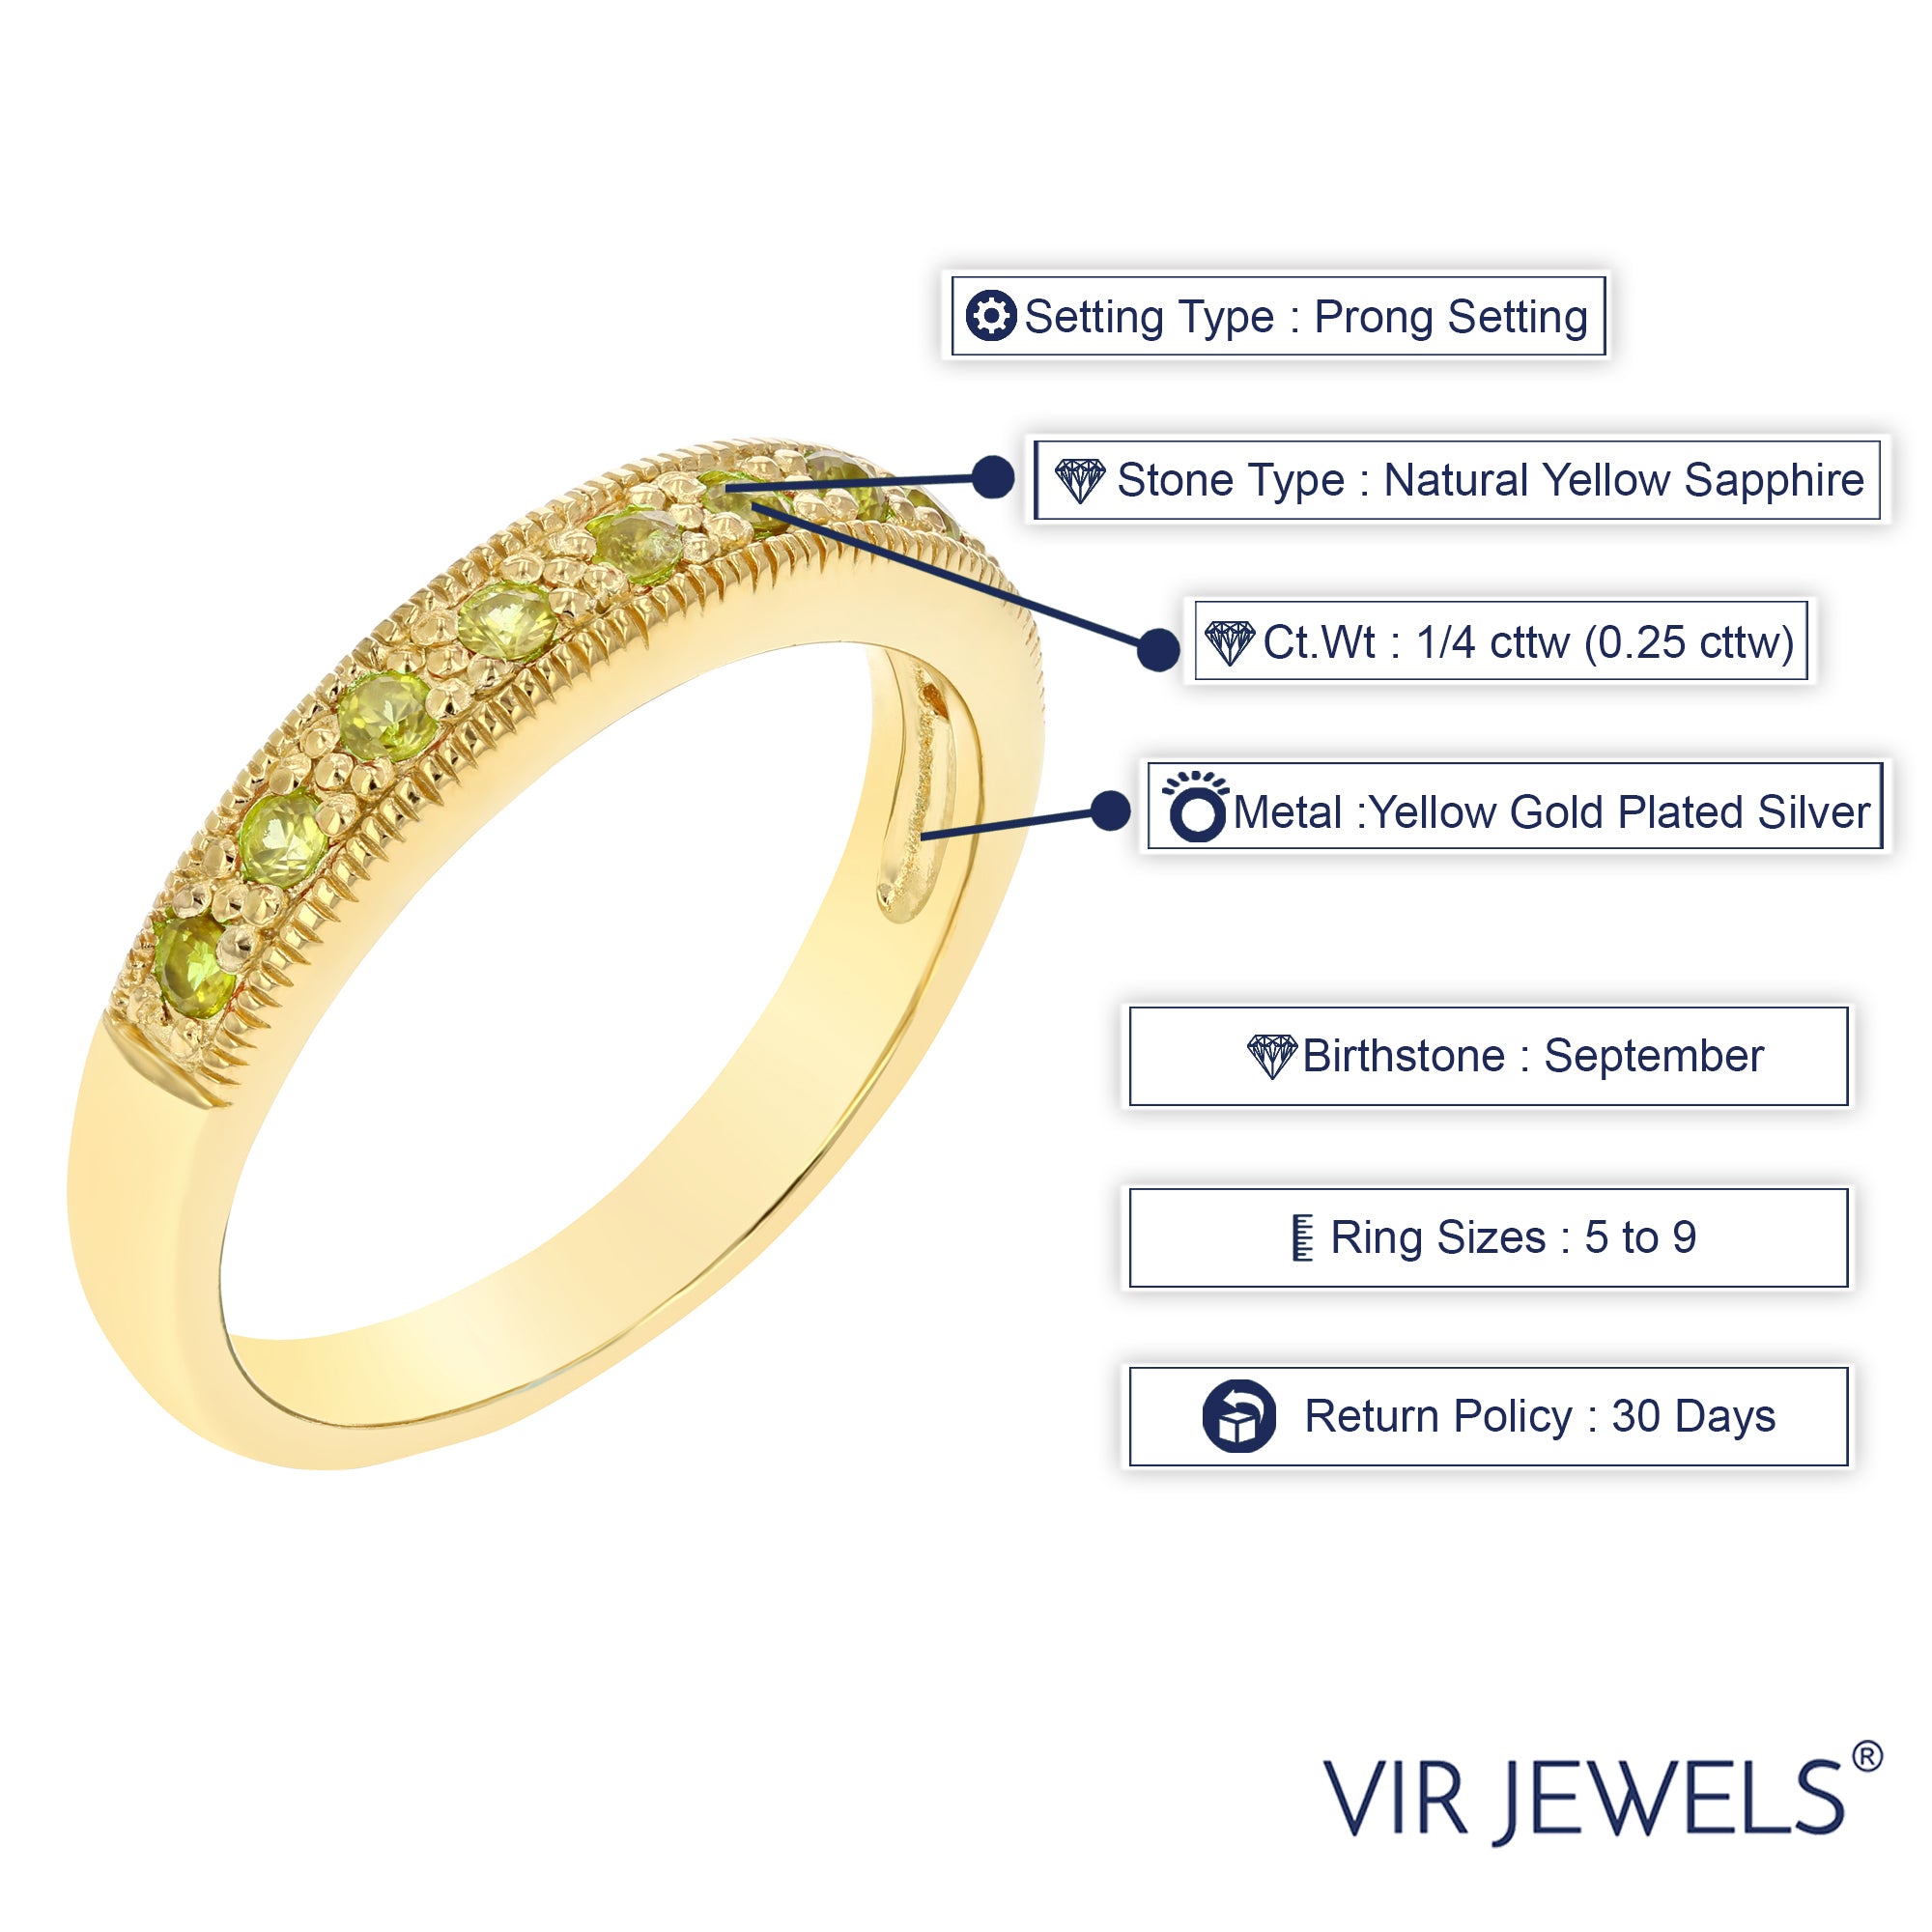 1/4 cttw Yellow Sapphire Wedding Band Yellow Gold Plated over Silver Milgrain